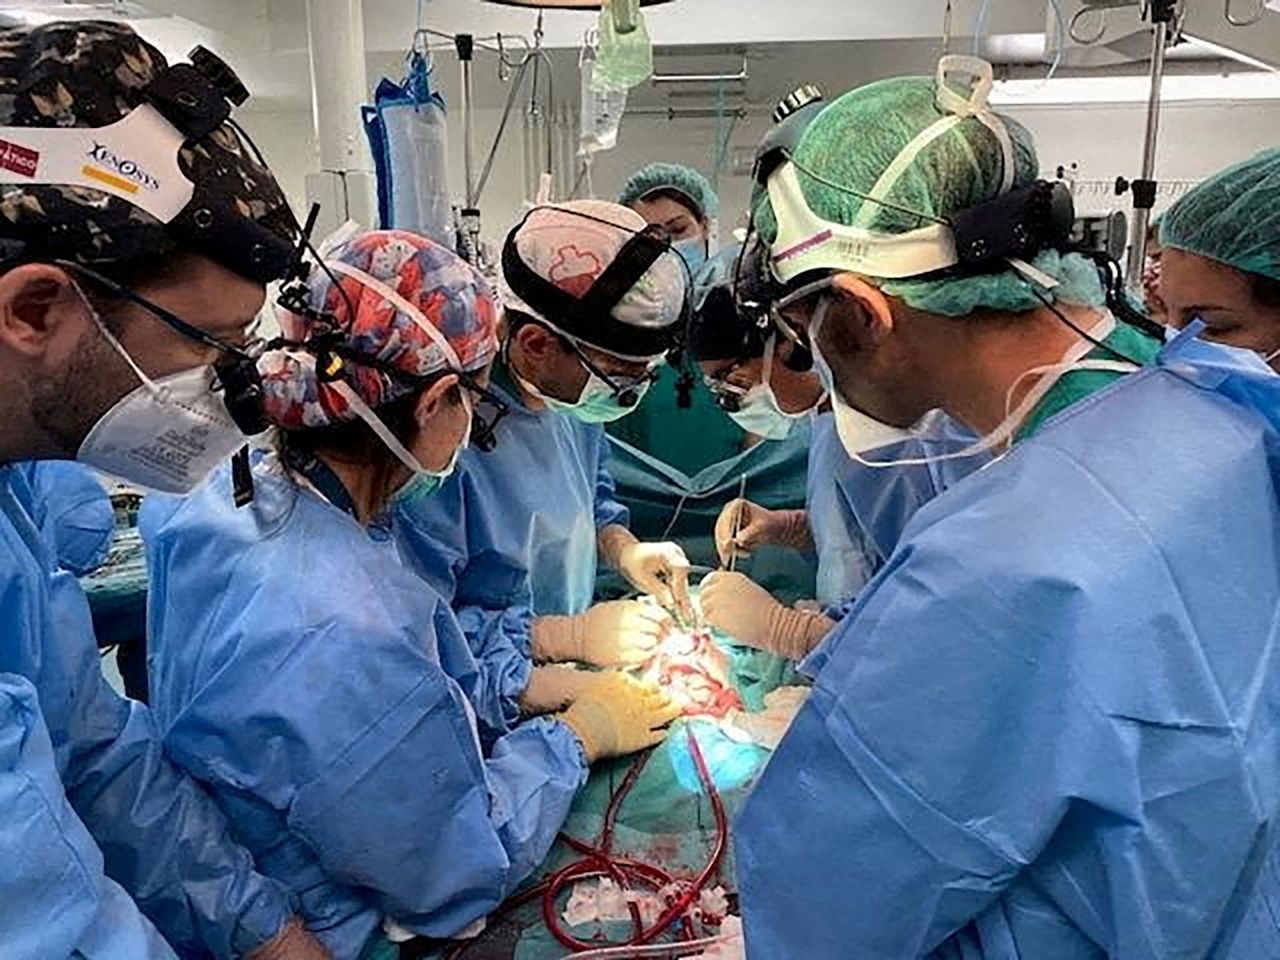 Doctors perform an intestine transplant in Madrid in this undated photo obtained by the Reuters news agency on Tuesday, October 11. Madrid's La Paz hospital said a 1-year-old girl is the beneficiary of what is <a href="https://www.reuters.com/business/healthcare-pharmaceuticals/spanish-baby-gets-pioneering-intestine-transplant-2022-10-11/" target="_blank" target="_blank">the world's first successful intestine transplant.</a>